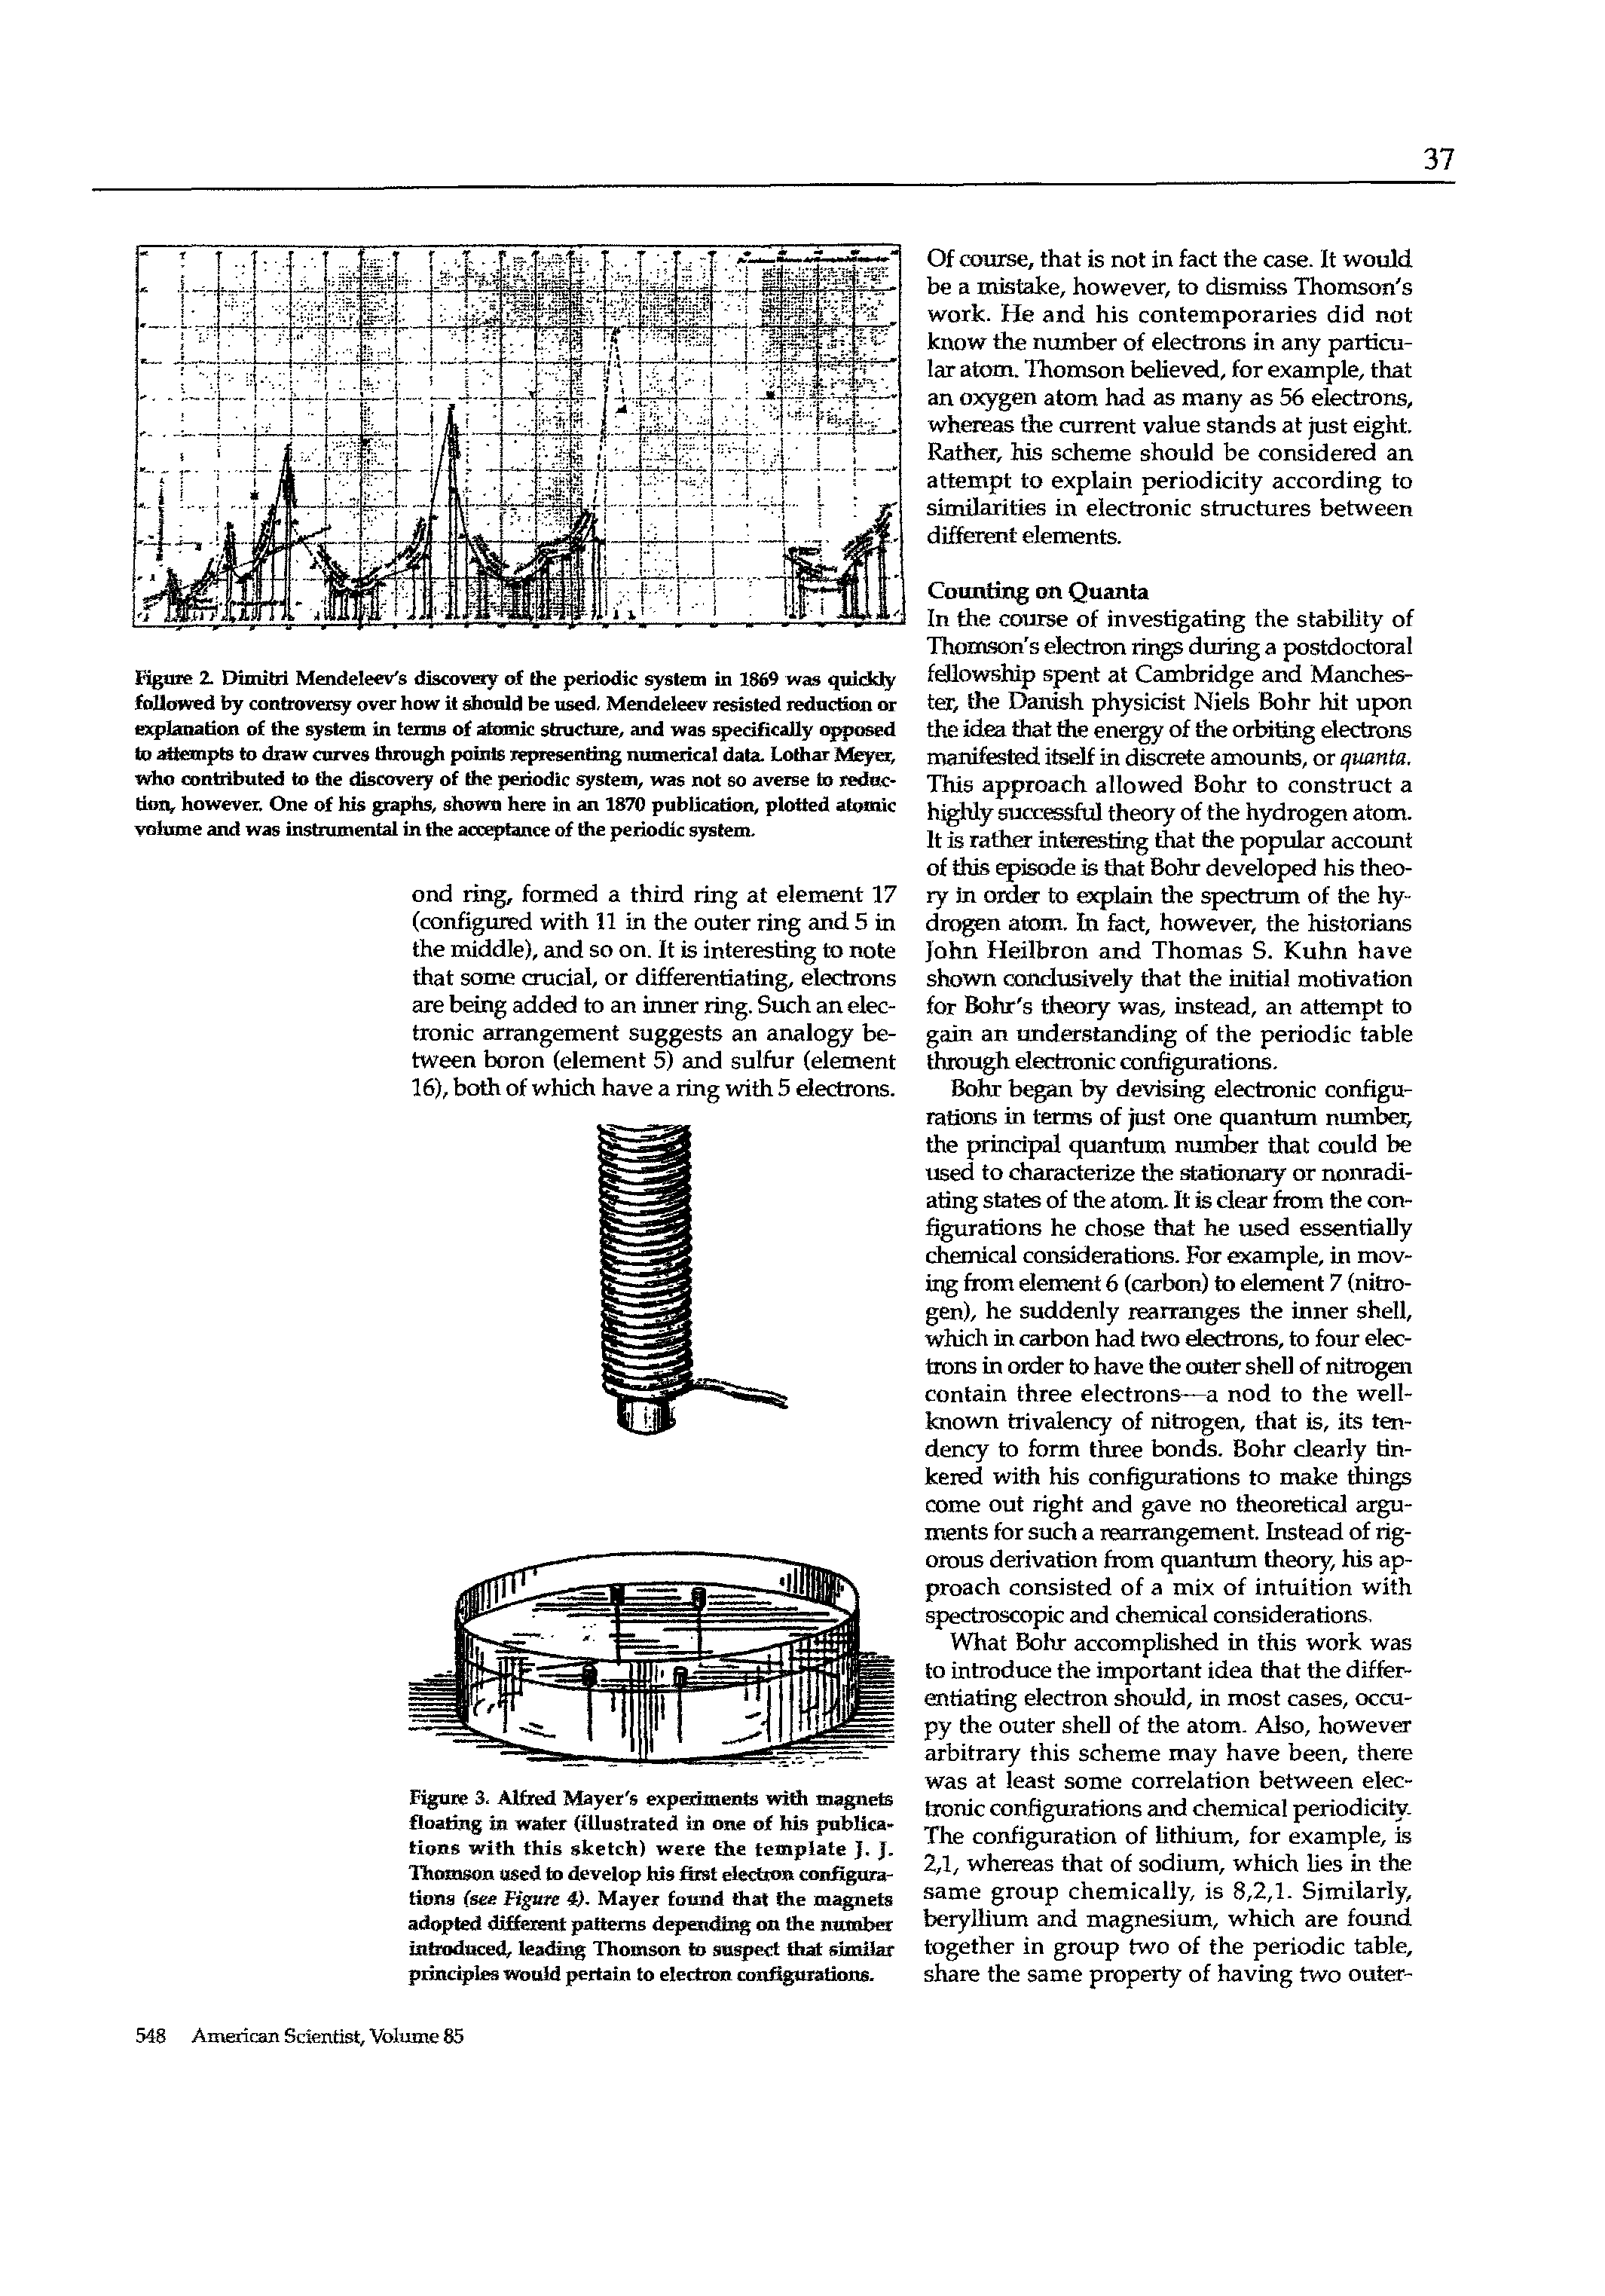 Figure 3. Alfred Mayer s experiments with magnets floating in water (illustrated in one of his publications with this sketch) were the template J. J. Thomson used to develop hi9 first electron configurations (see Figure 4. Mayer found that the magnets adopted different patterns depending on the number introduced, leading Thomson to suspect that similar principles would pertain to electron configurations.